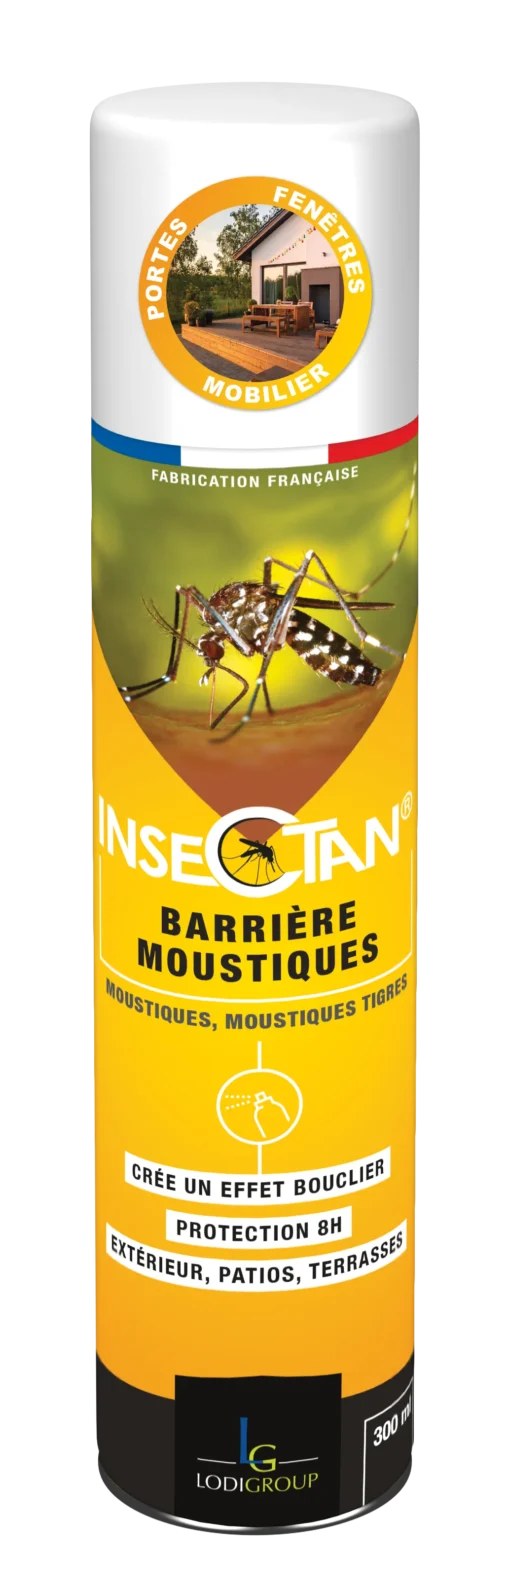 INSECTAN Barriere moustiques scaled